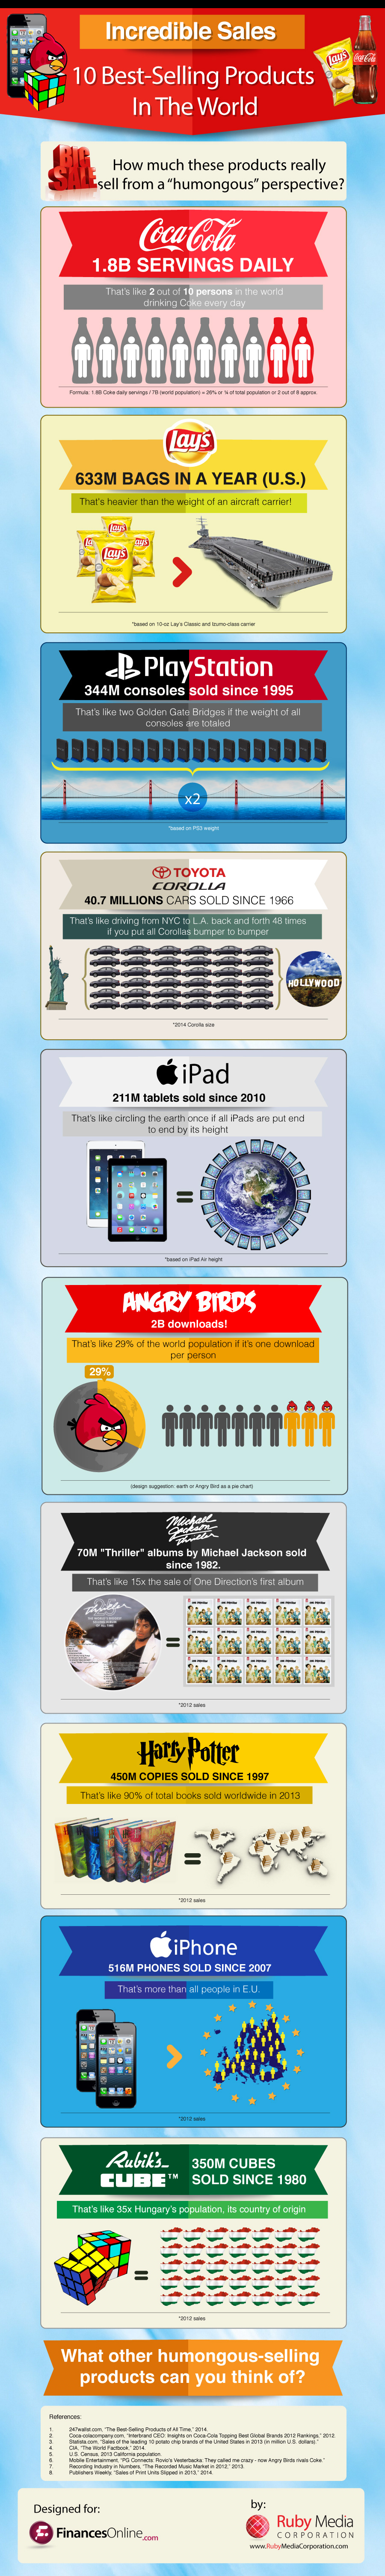 Comparison of World's Best-selling Products: Angry Birds Is A Game With Insance Sale Figures